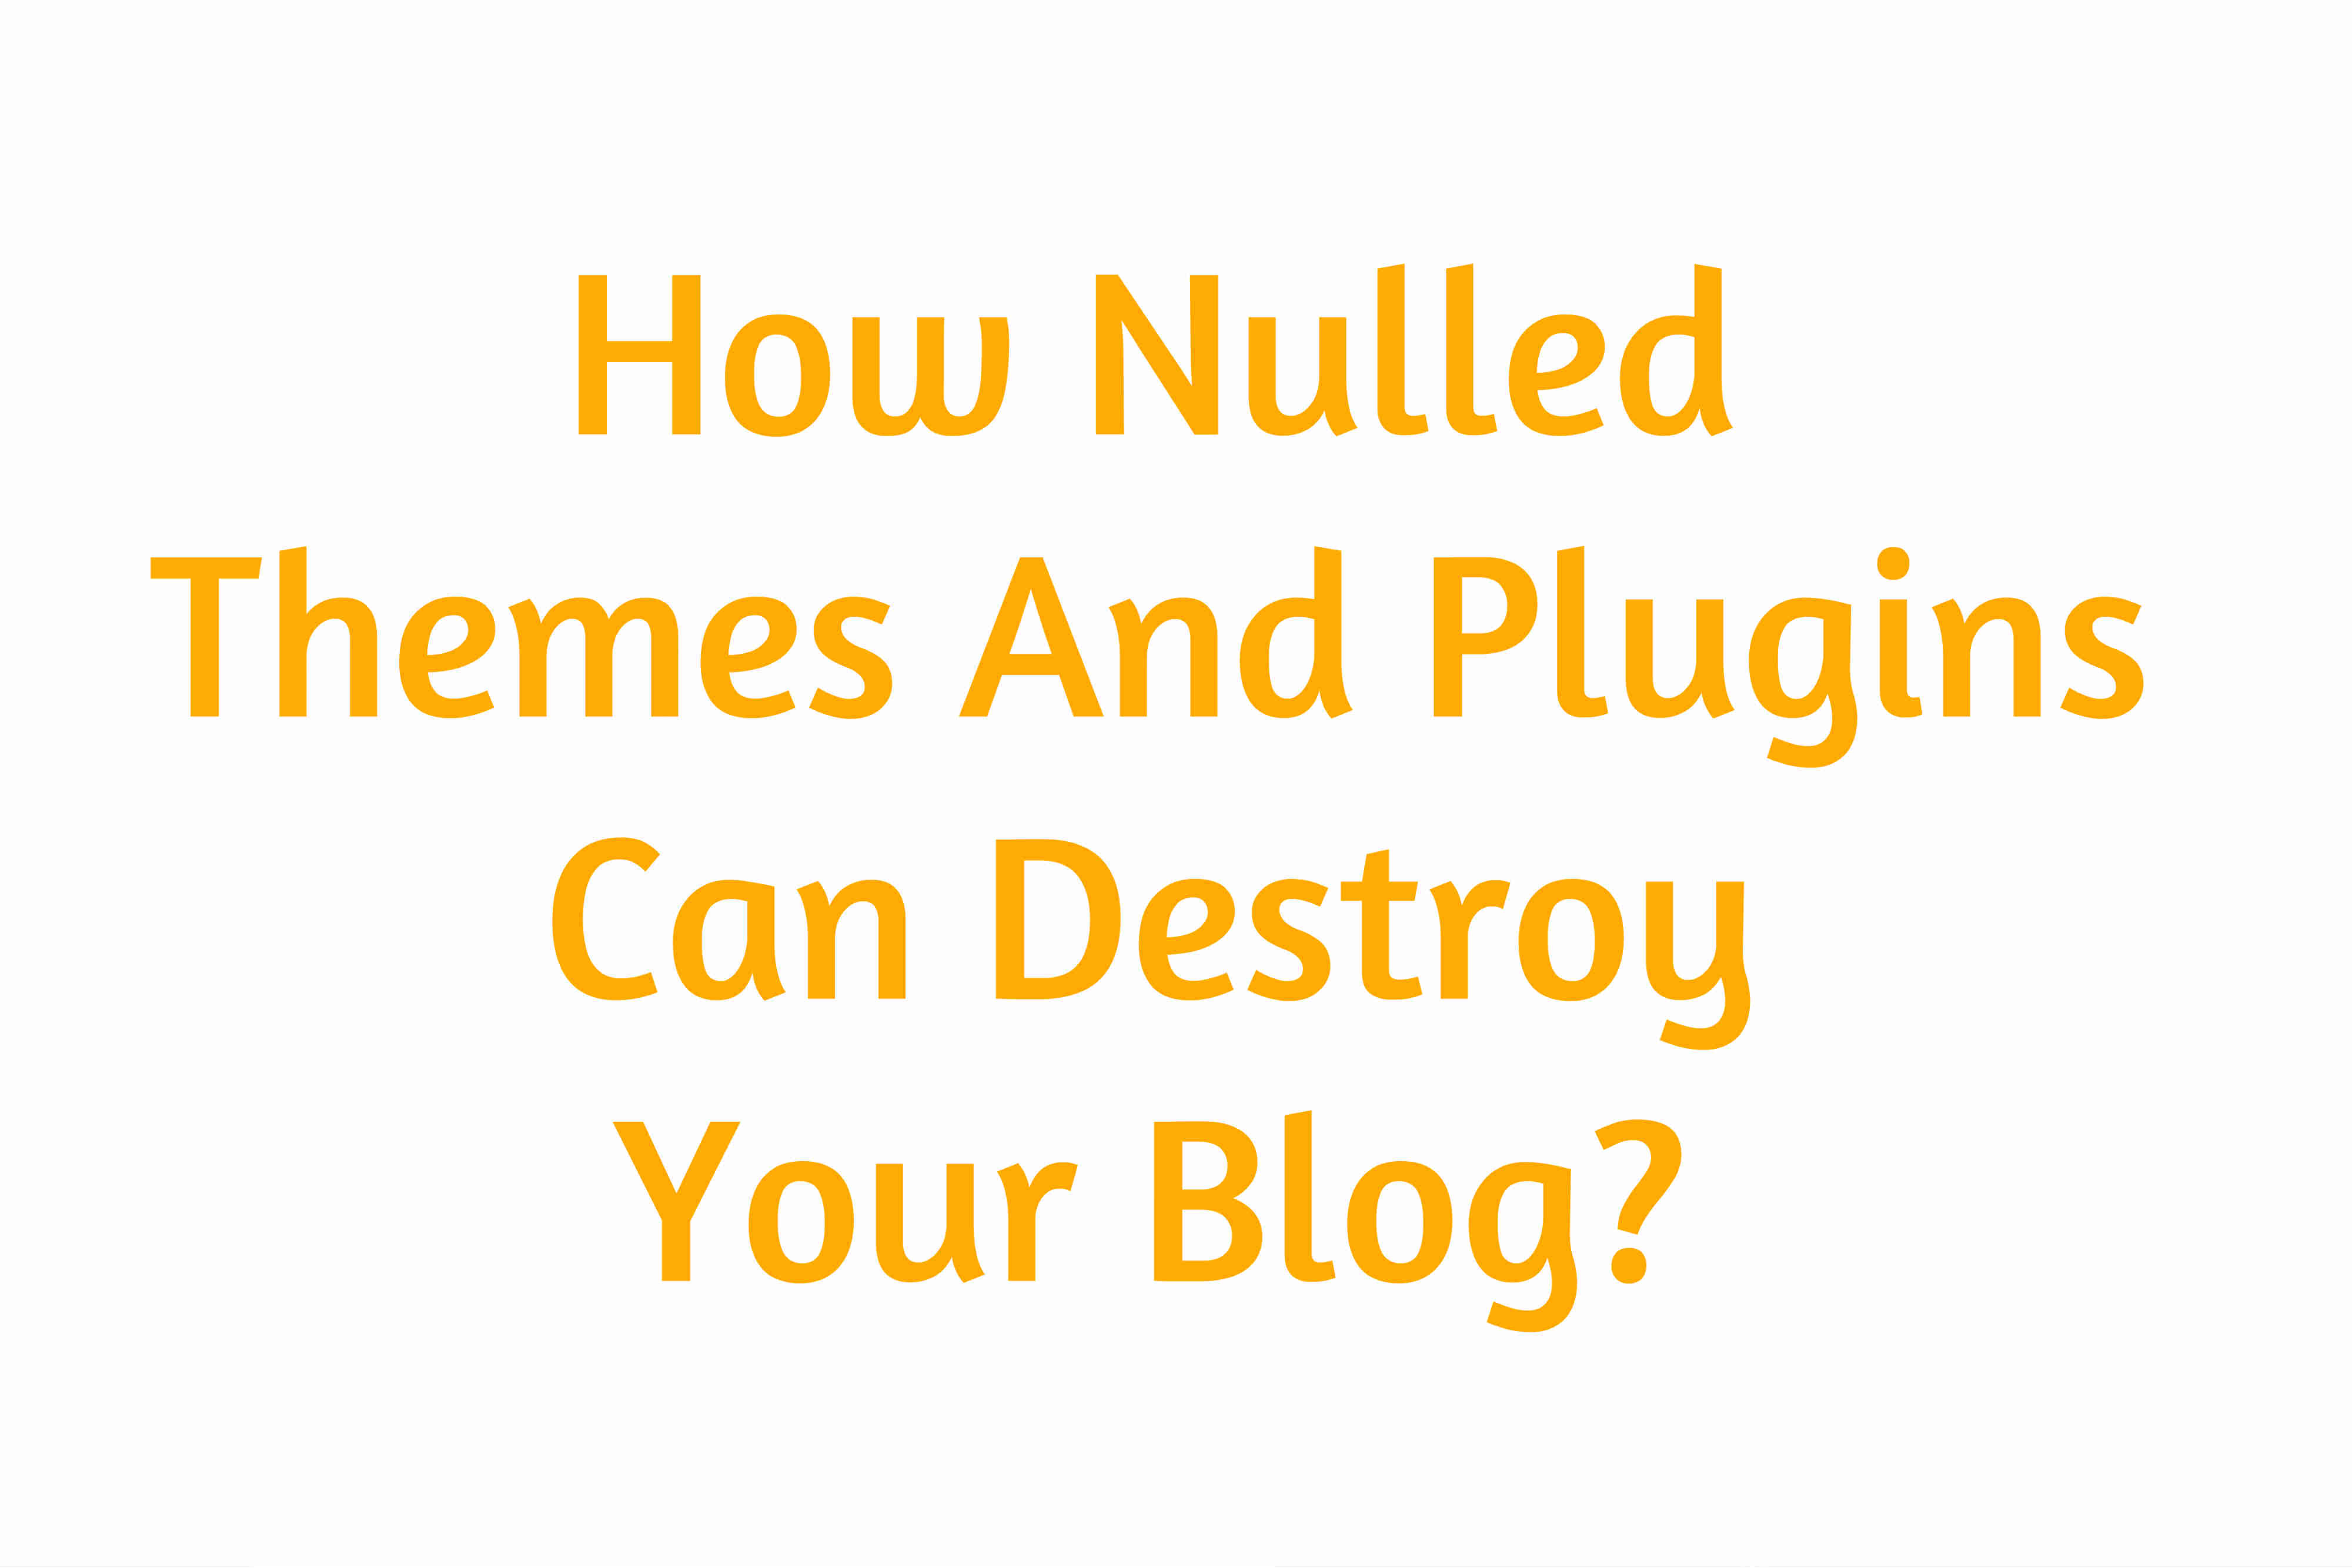 How Nulled Themes And Plugins Can Destroy Your Blog